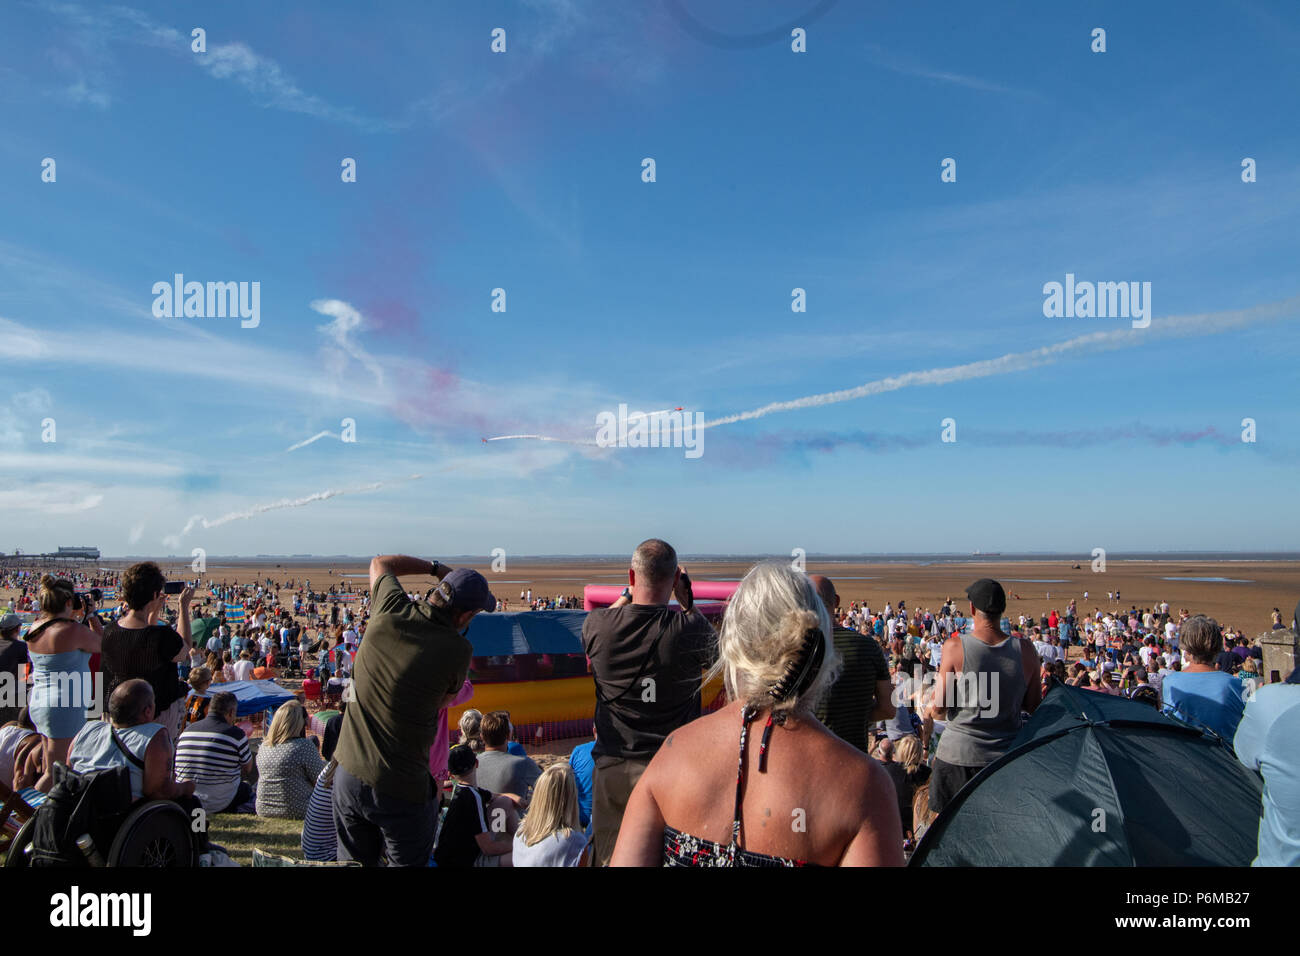 Cleethorpes beach, UK. 1st Jul, 2018. Armed response police patrol the crowds with loaded assault rifles at Armed Forces Day on Cleethorpes beach as thirty thousand tourists turn out in 28 degree heat to watch the air displays and military parades. Credit: Steve Thornton/Alamy Live News Stock Photo